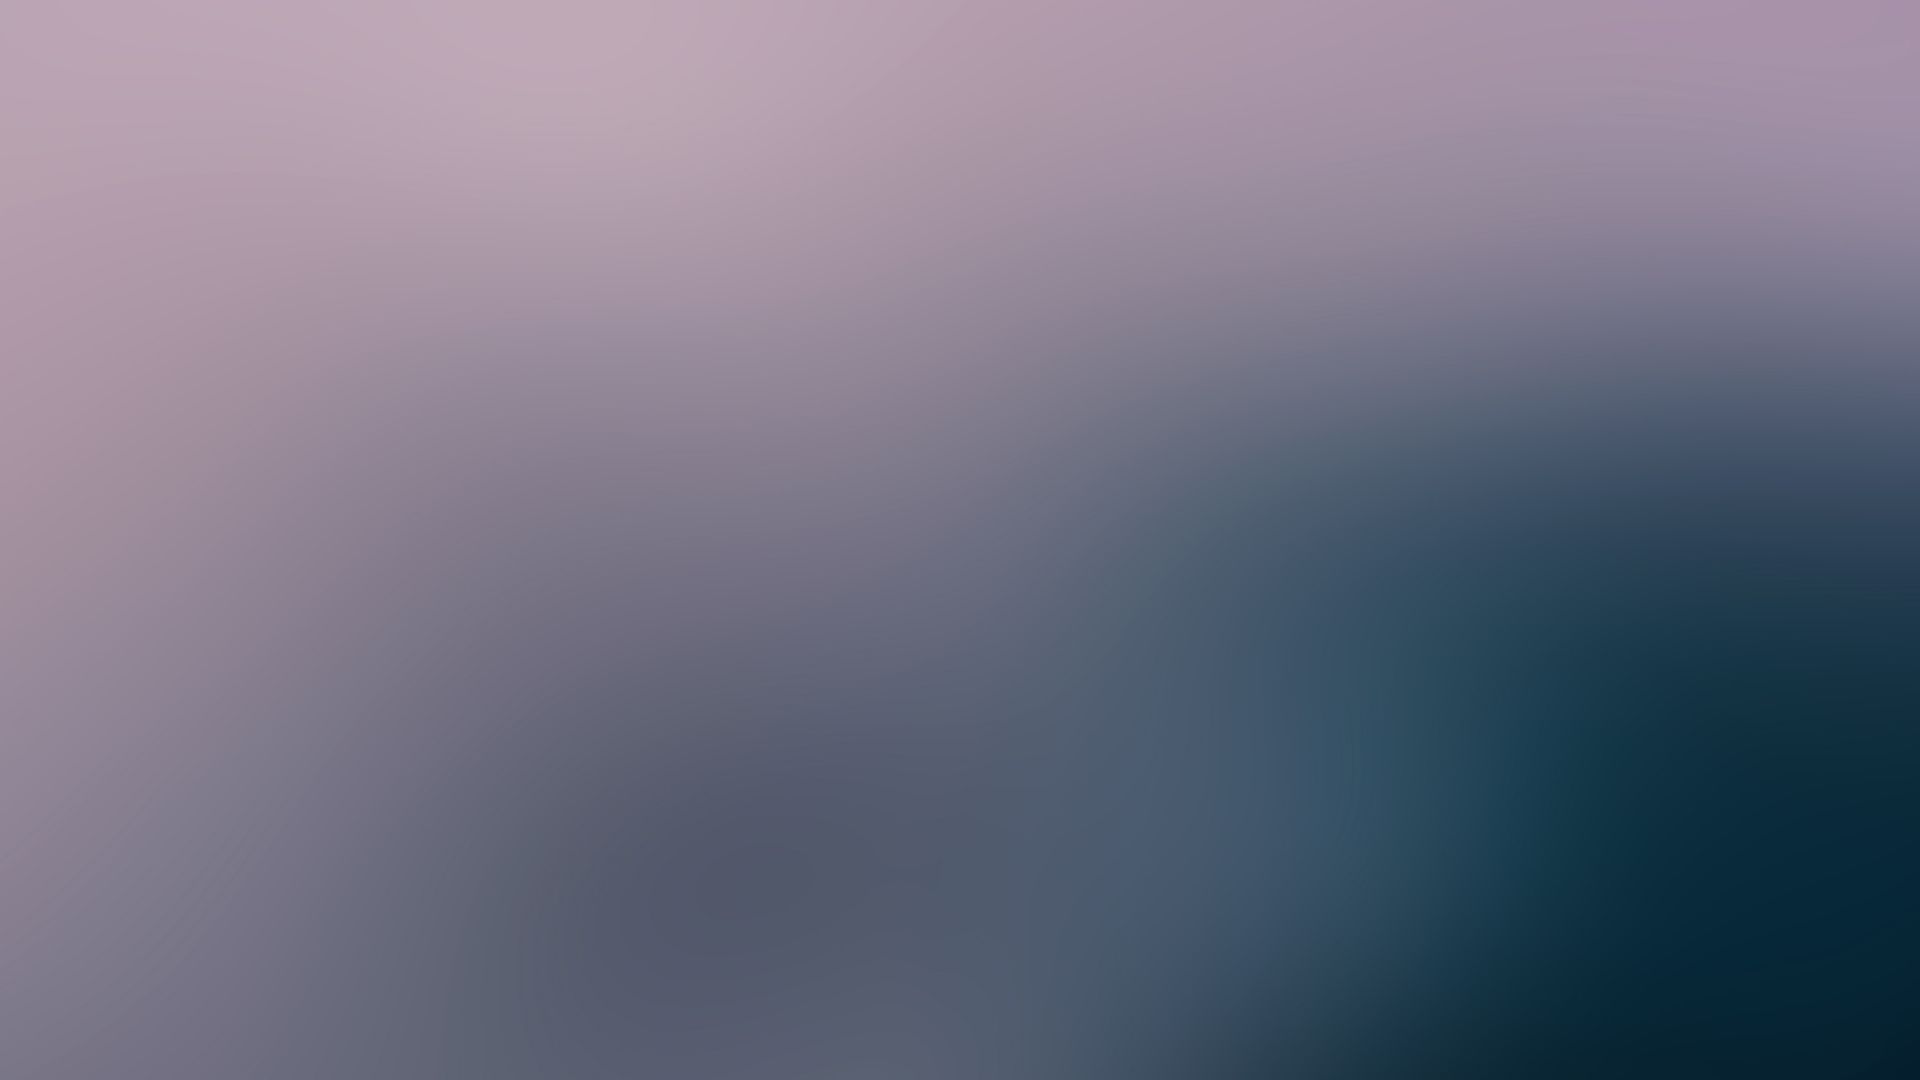 Wallpaper Abstract, blue and gray, gradient, blur